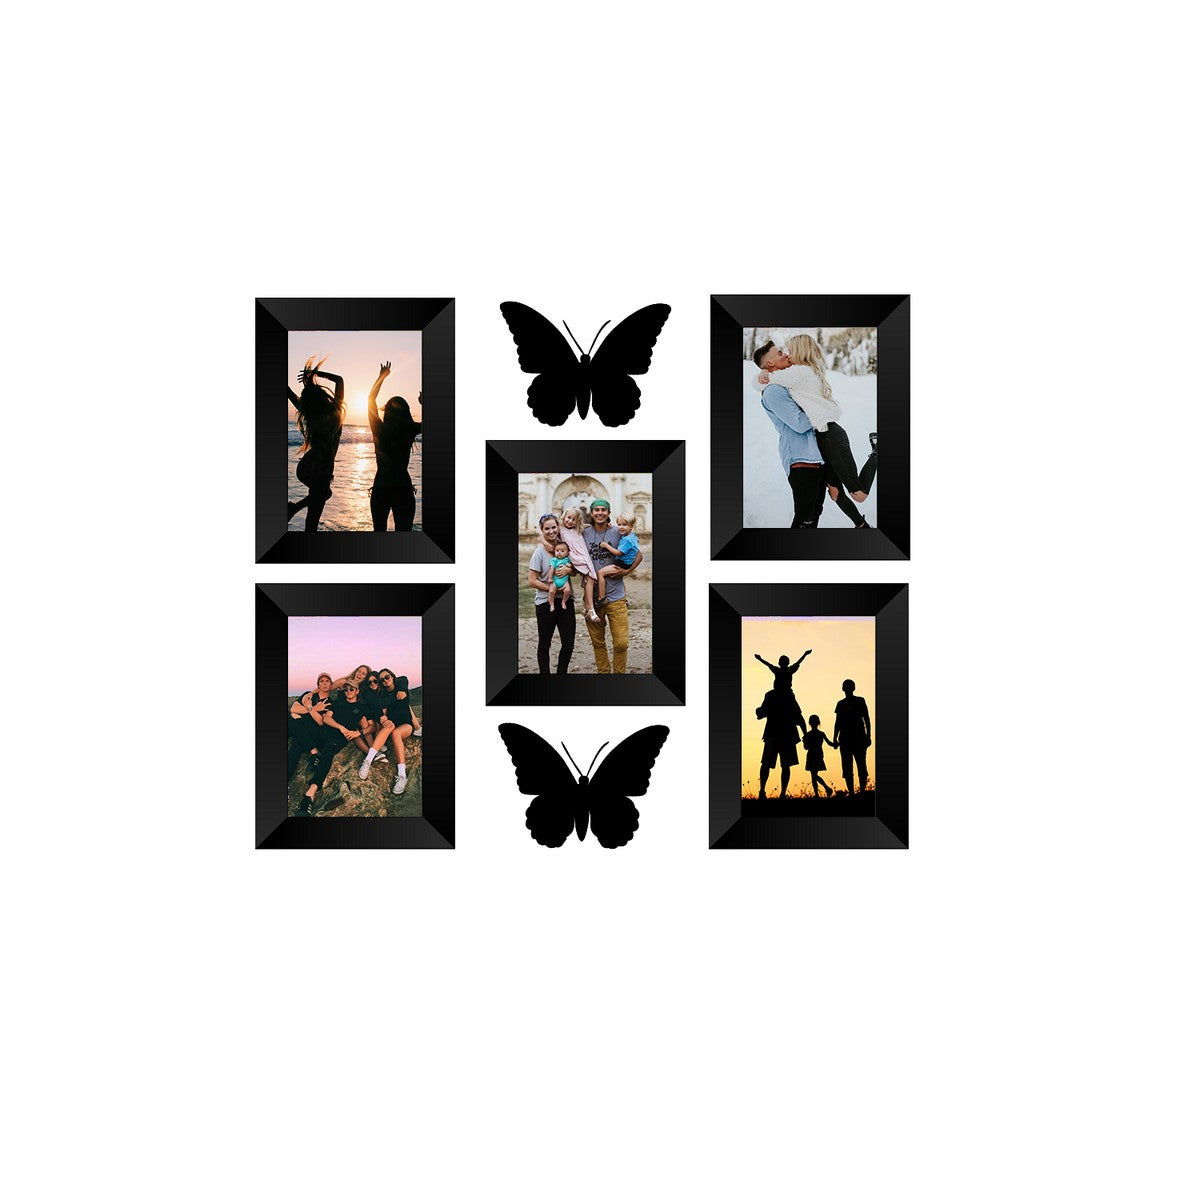 Memory Wall Collage Photo Frame - Set of 5 Photo Frames for 5 Photos of 5"x7", 2 Pieces of BUTTERFLIES